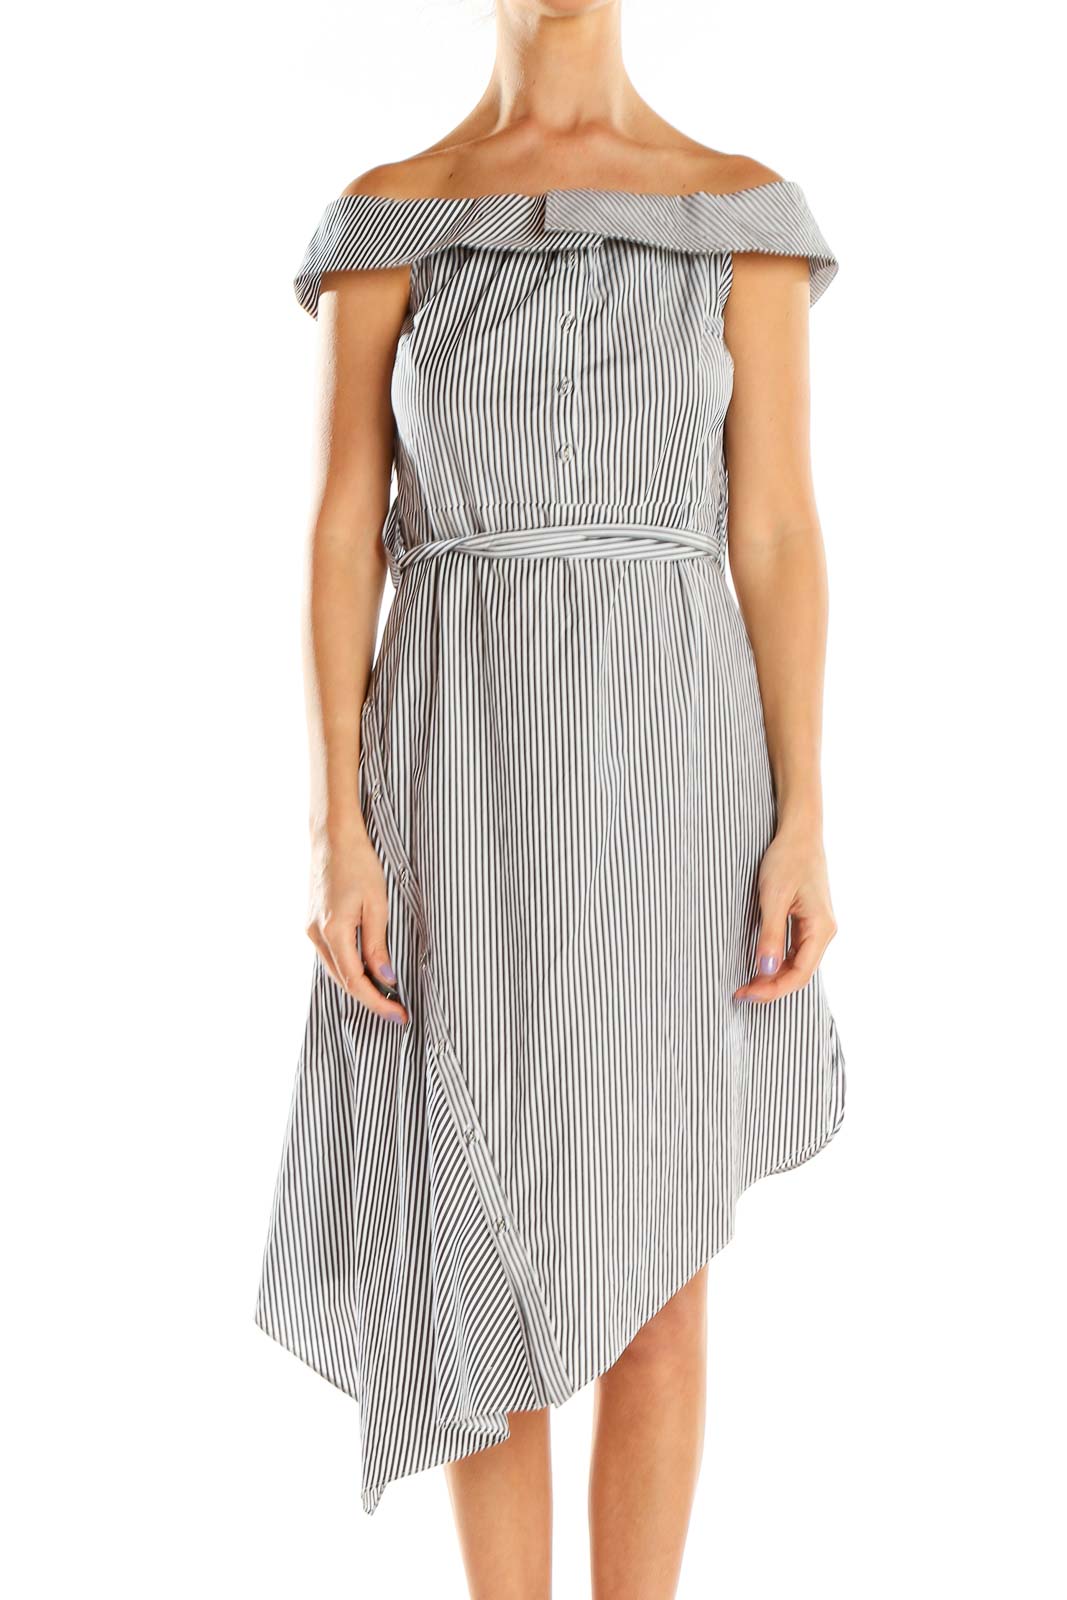 Gray Striped Off The Shoulder Asymmetrical Dress Front